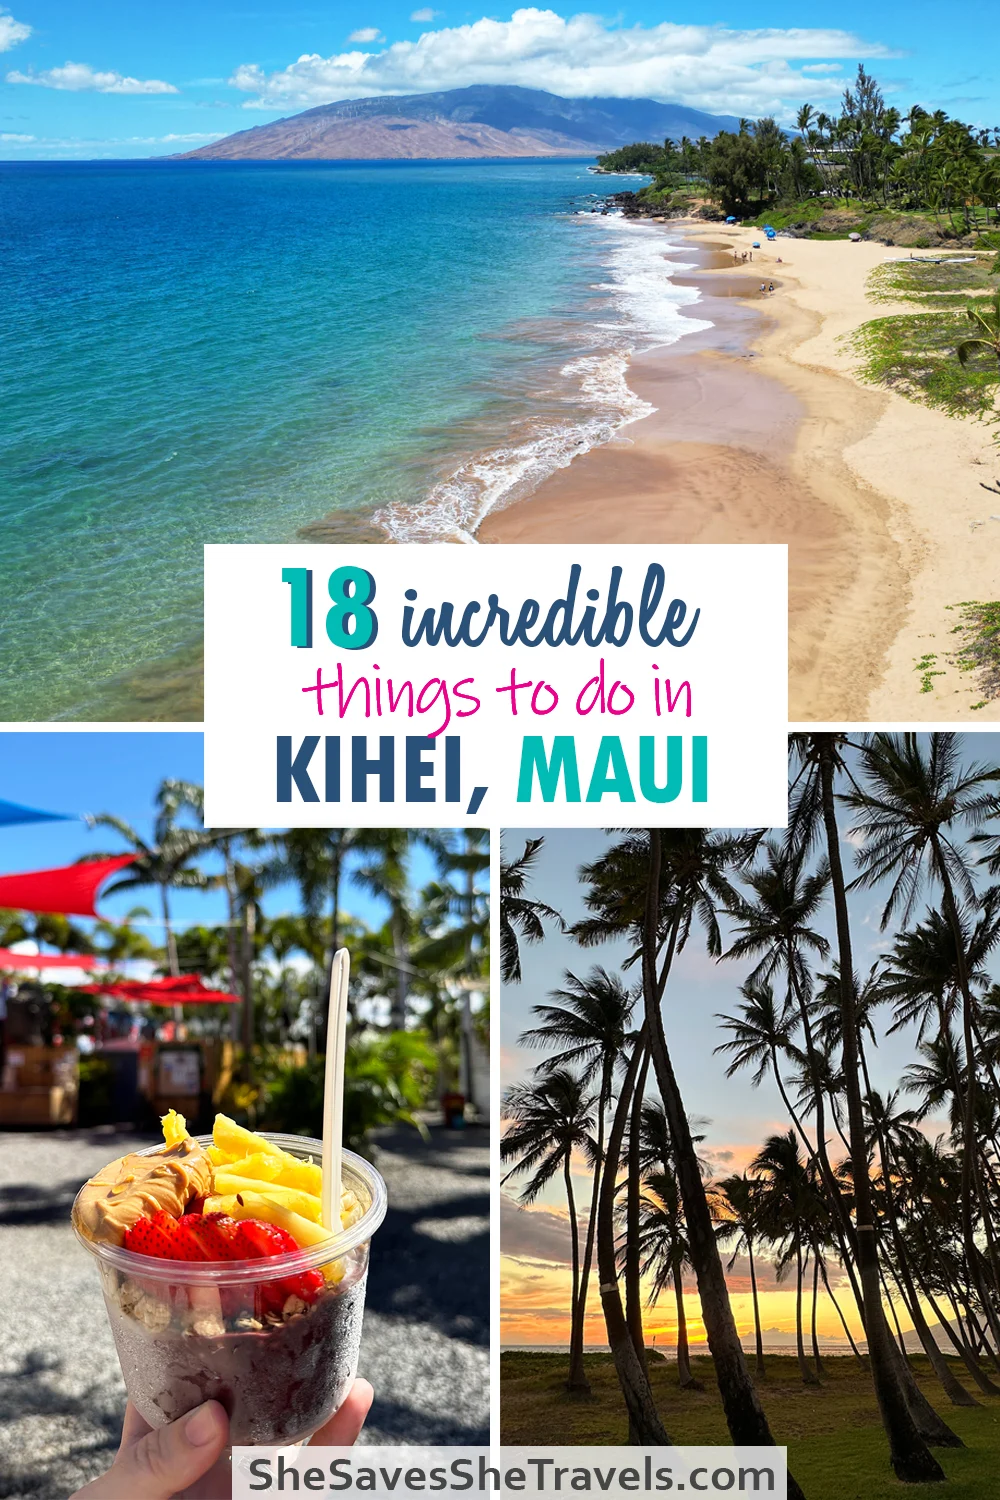 18 incredible things to do in Kihei, Maui with photos of beach, alai bowl and sunset with palm trees